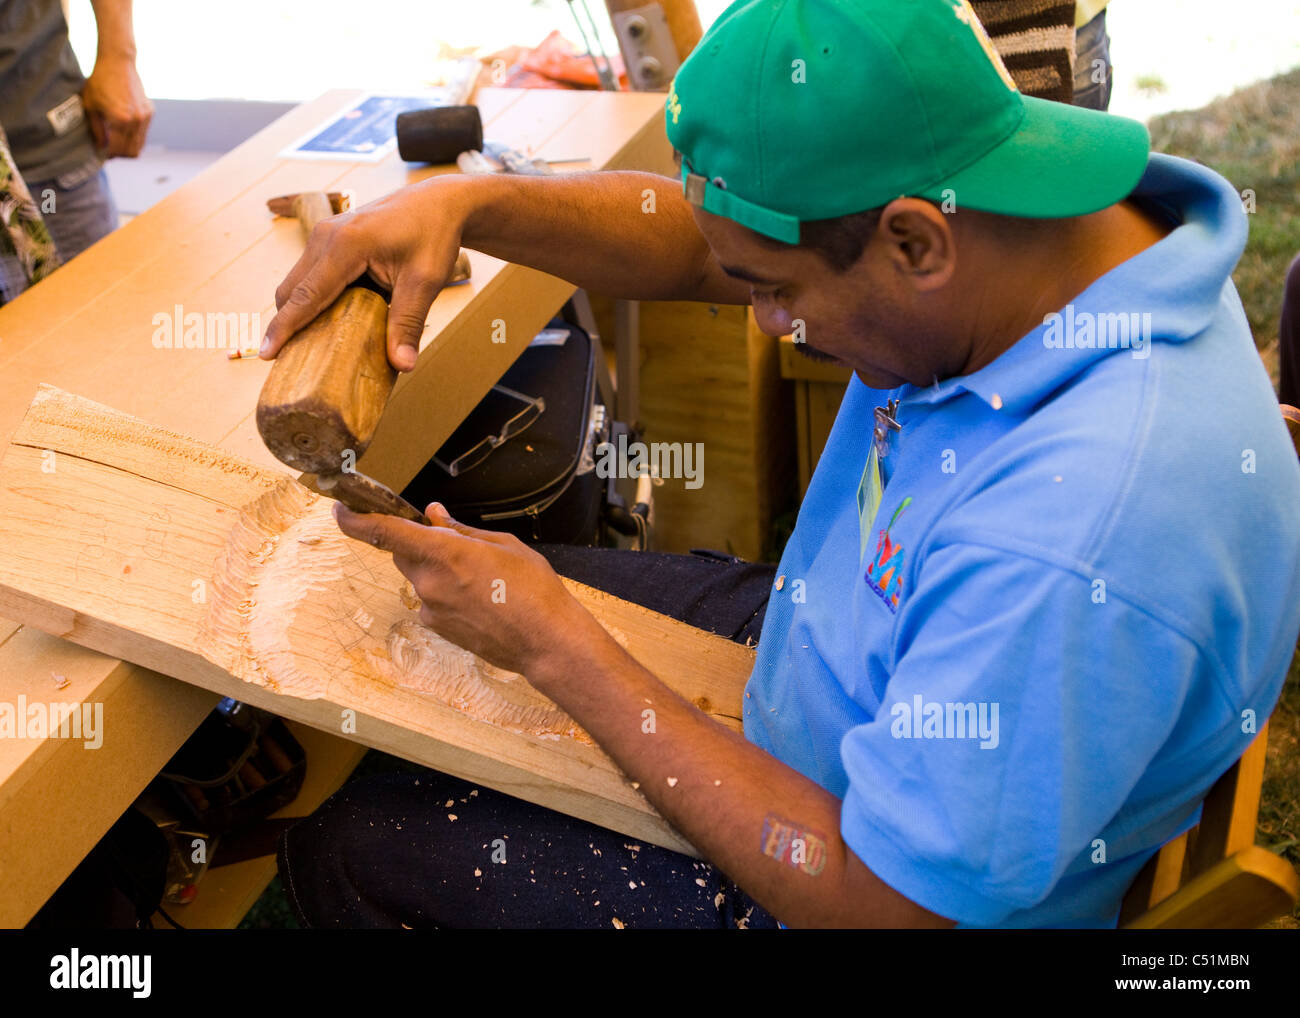 Colombian wood sculptor working with chisel and mallet Stock Photo